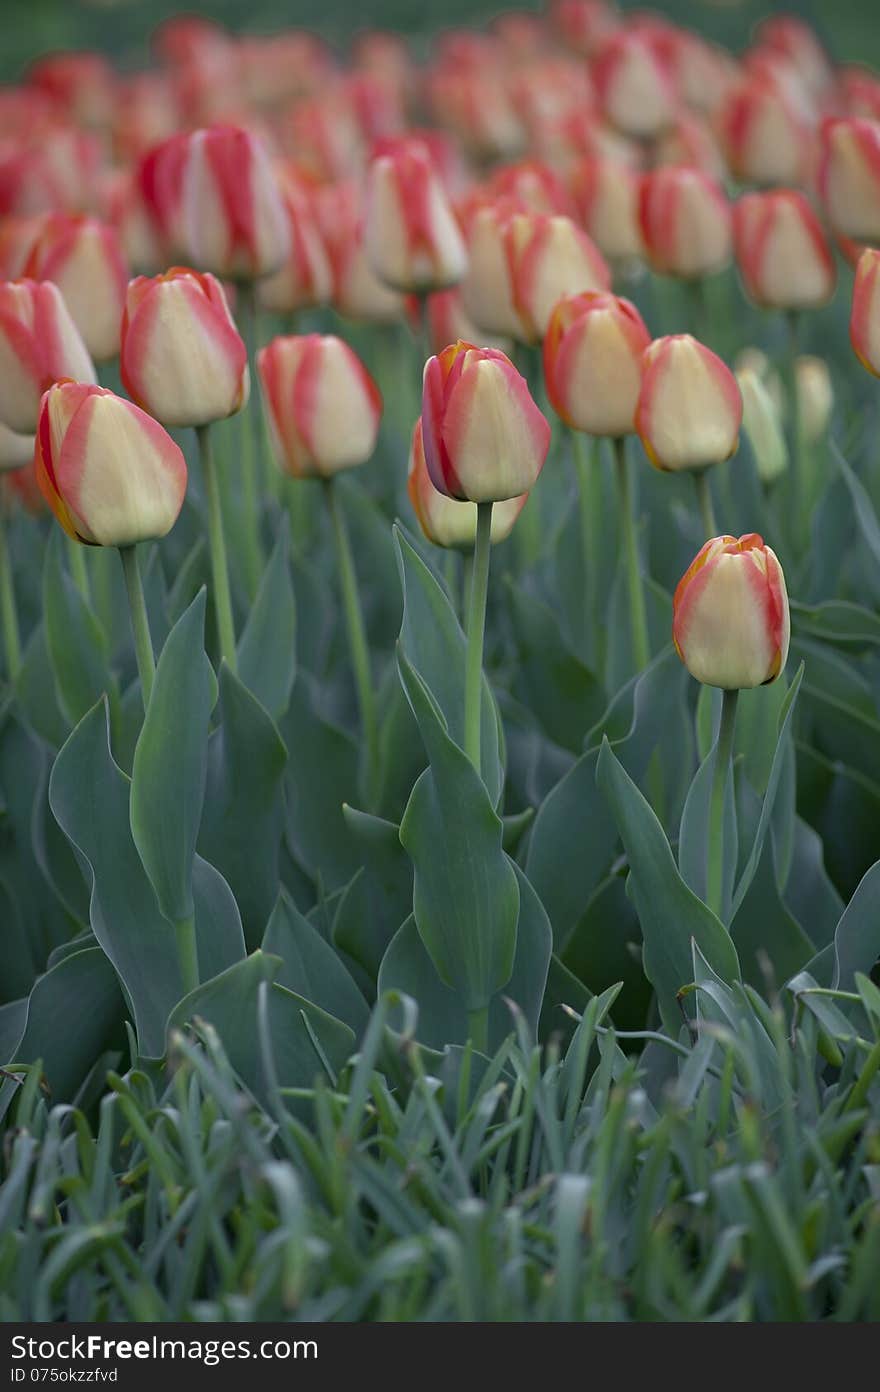 A closeup of a field of red and yellow striped tulips, taken from ground level and showing the stems and leaves.